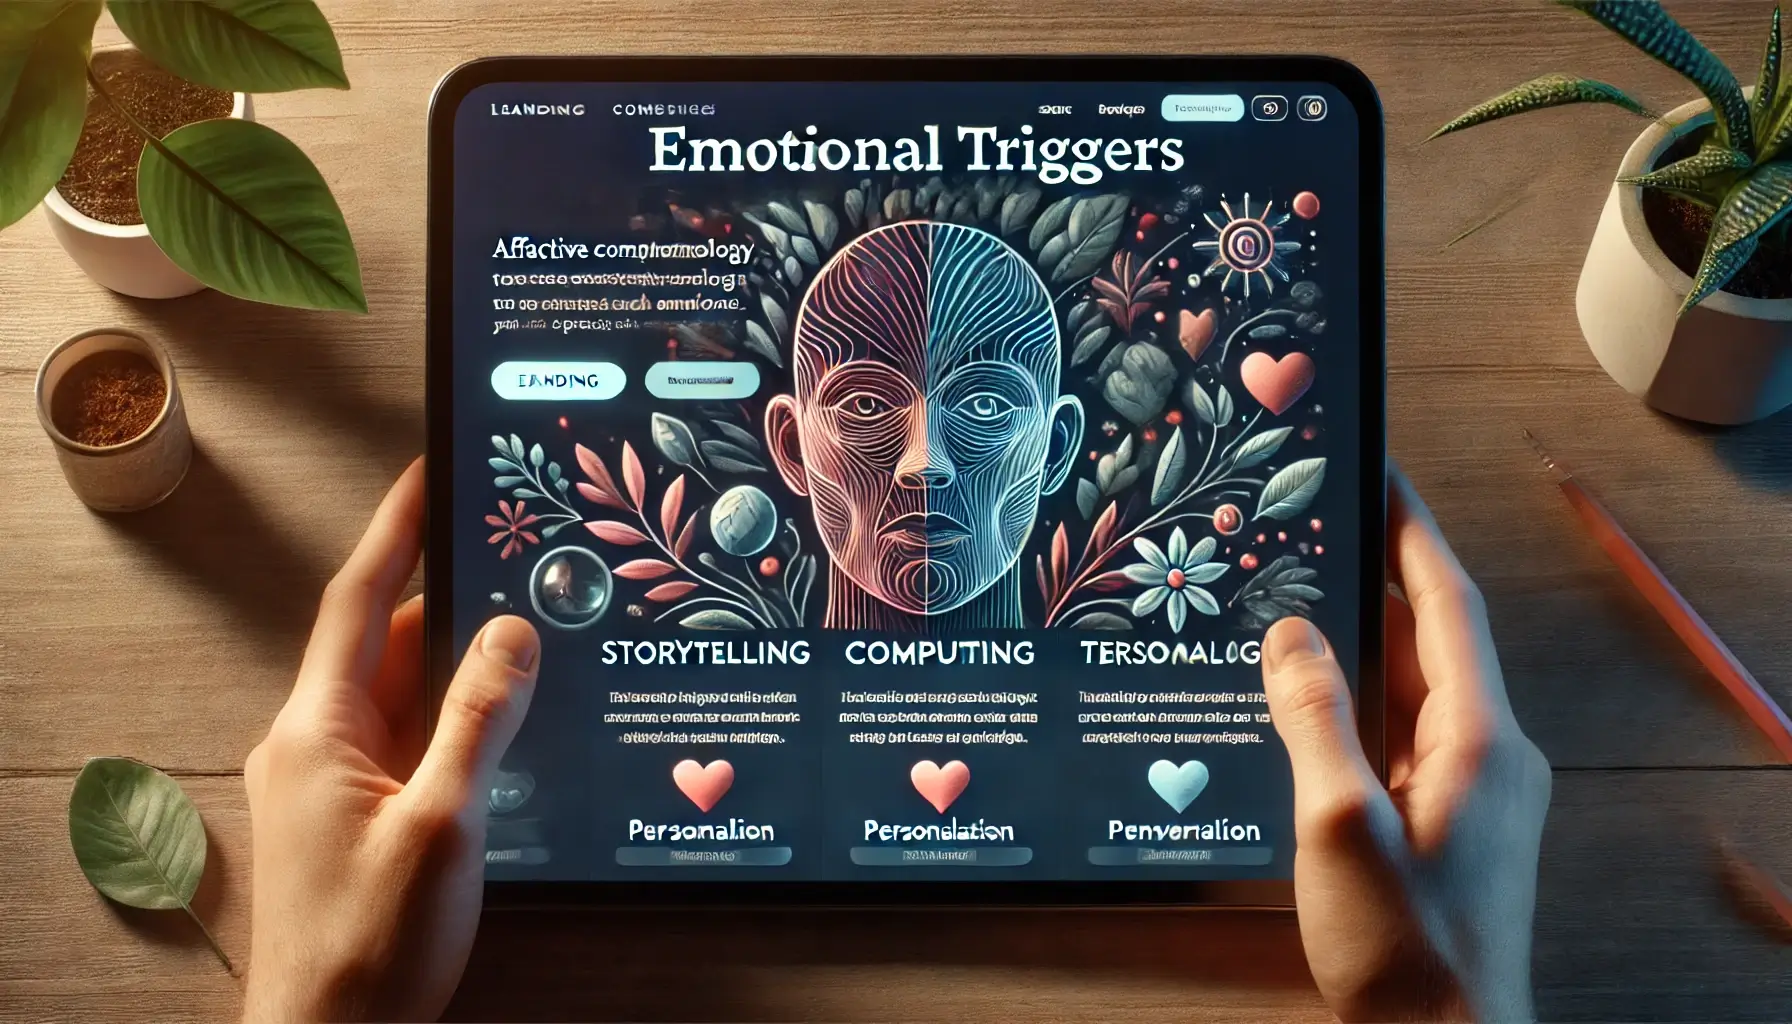 The Secret Behind High Conversion Websites involves using emotional triggers to create a deep connection with the audience. A website landing page features storytelling elements, affective computing technology, and a carefully chosen color scheme to evoke specific emotions.